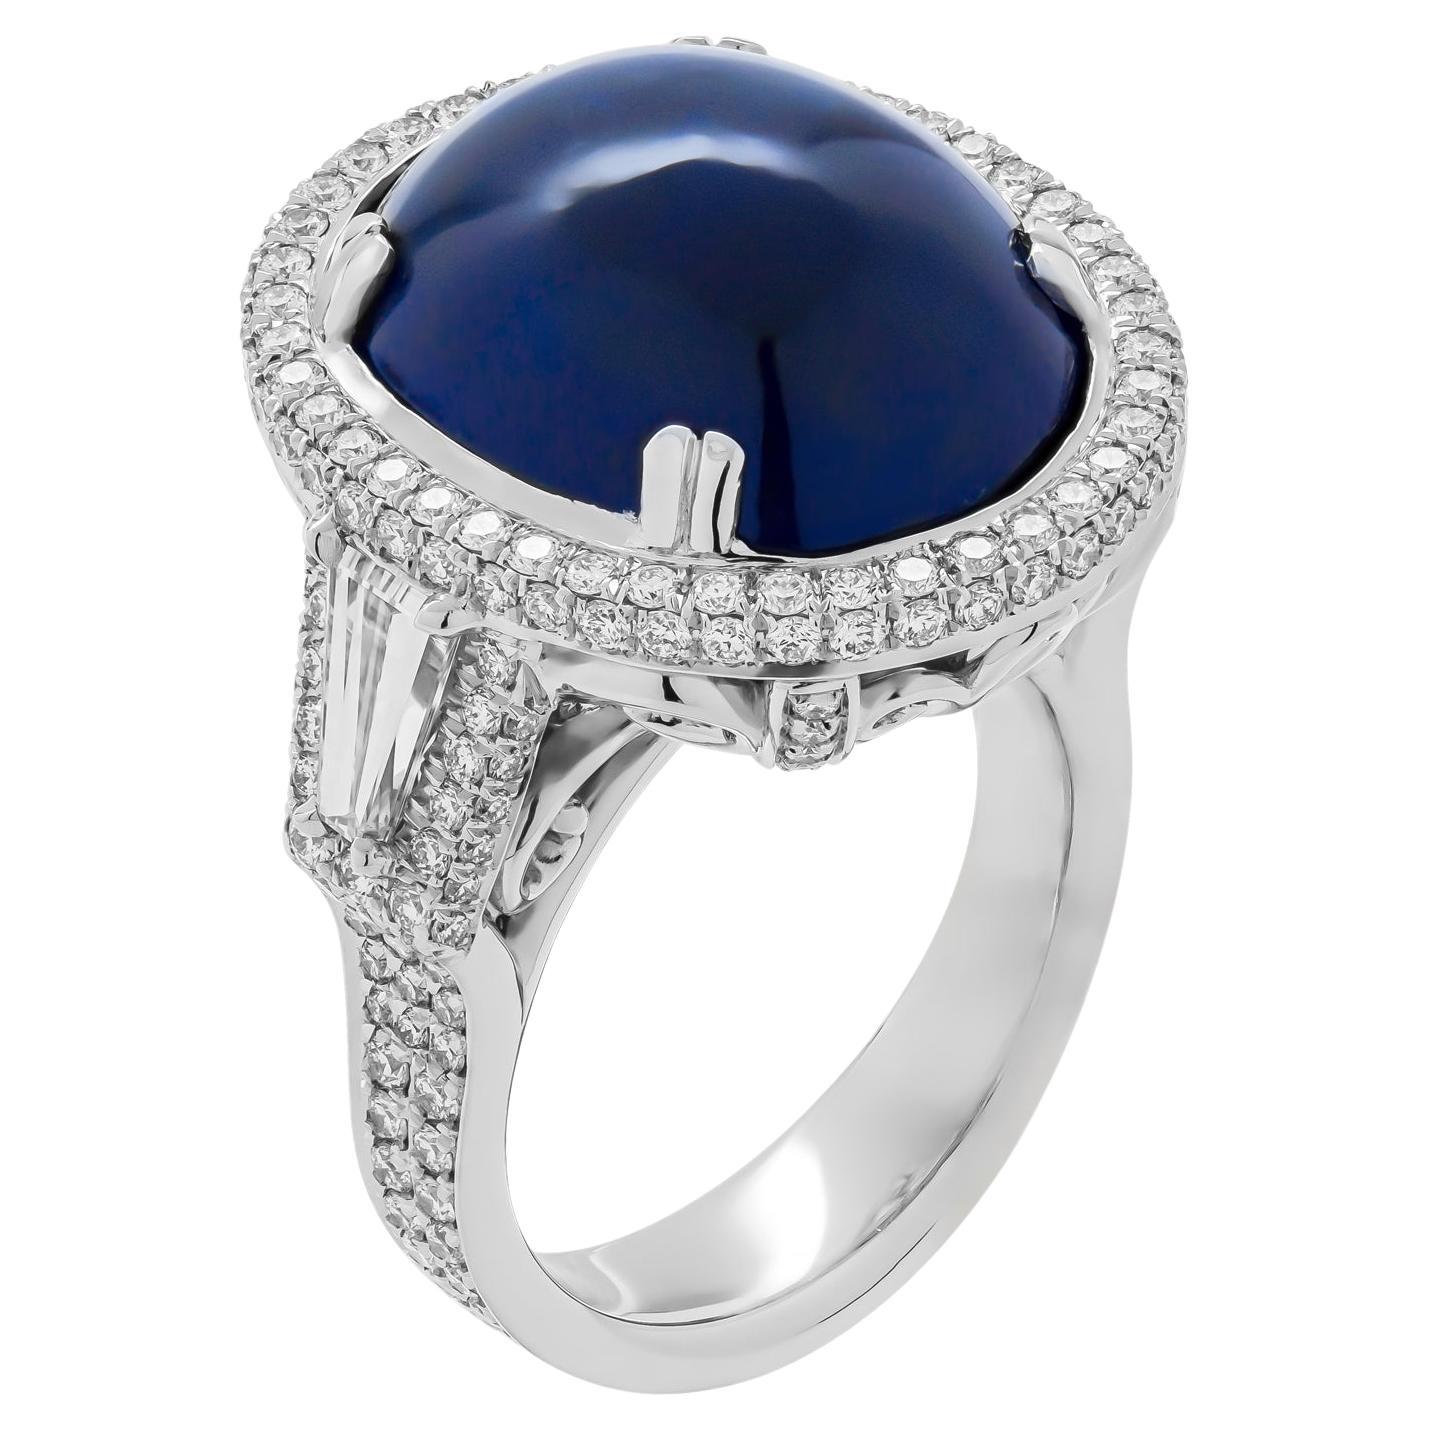 GIA Certified 30.18 Carat Oval Sapphire Cabochon Diamond Cocktail Ring